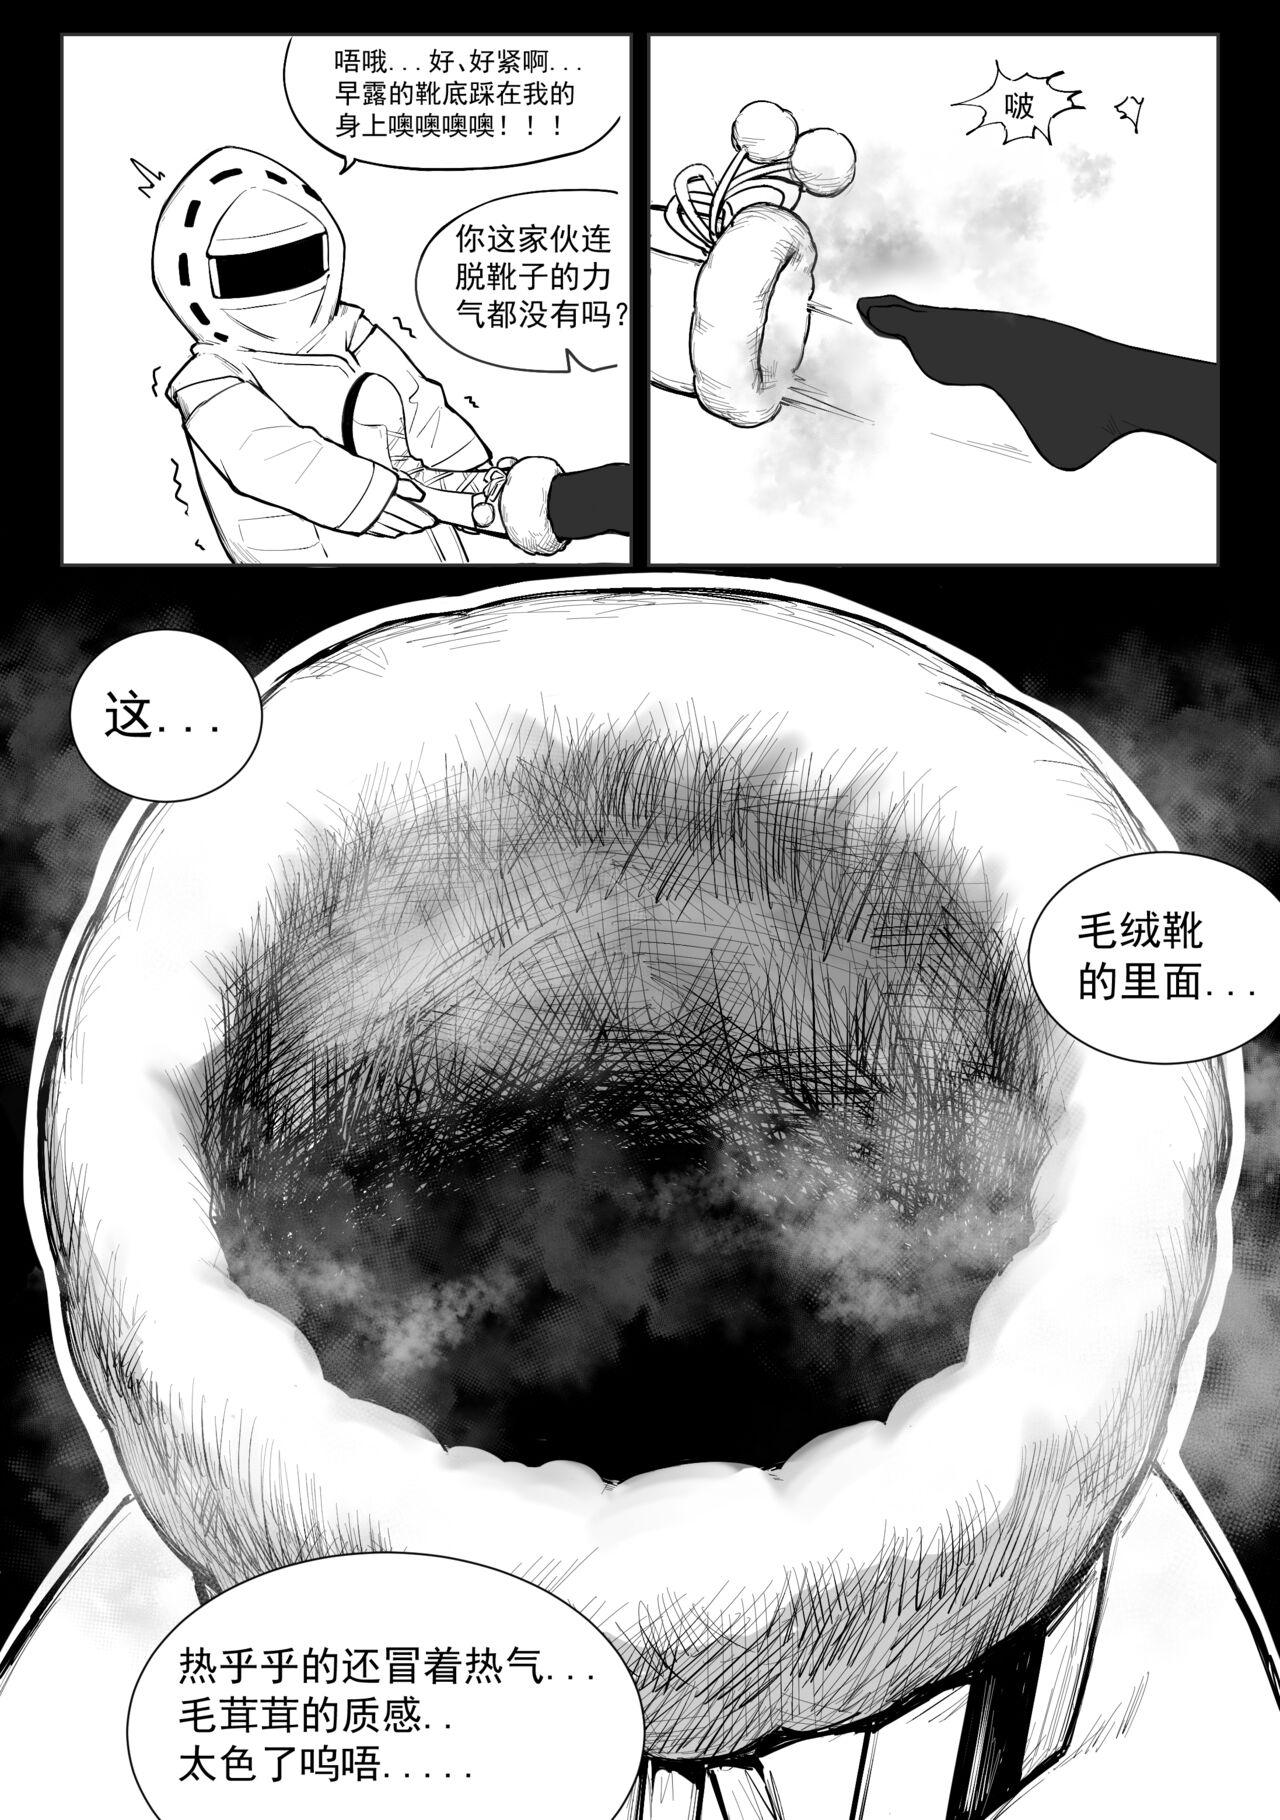 Casting 澄澈之冰 早露 - Arknights Amateur Sex - Page 2